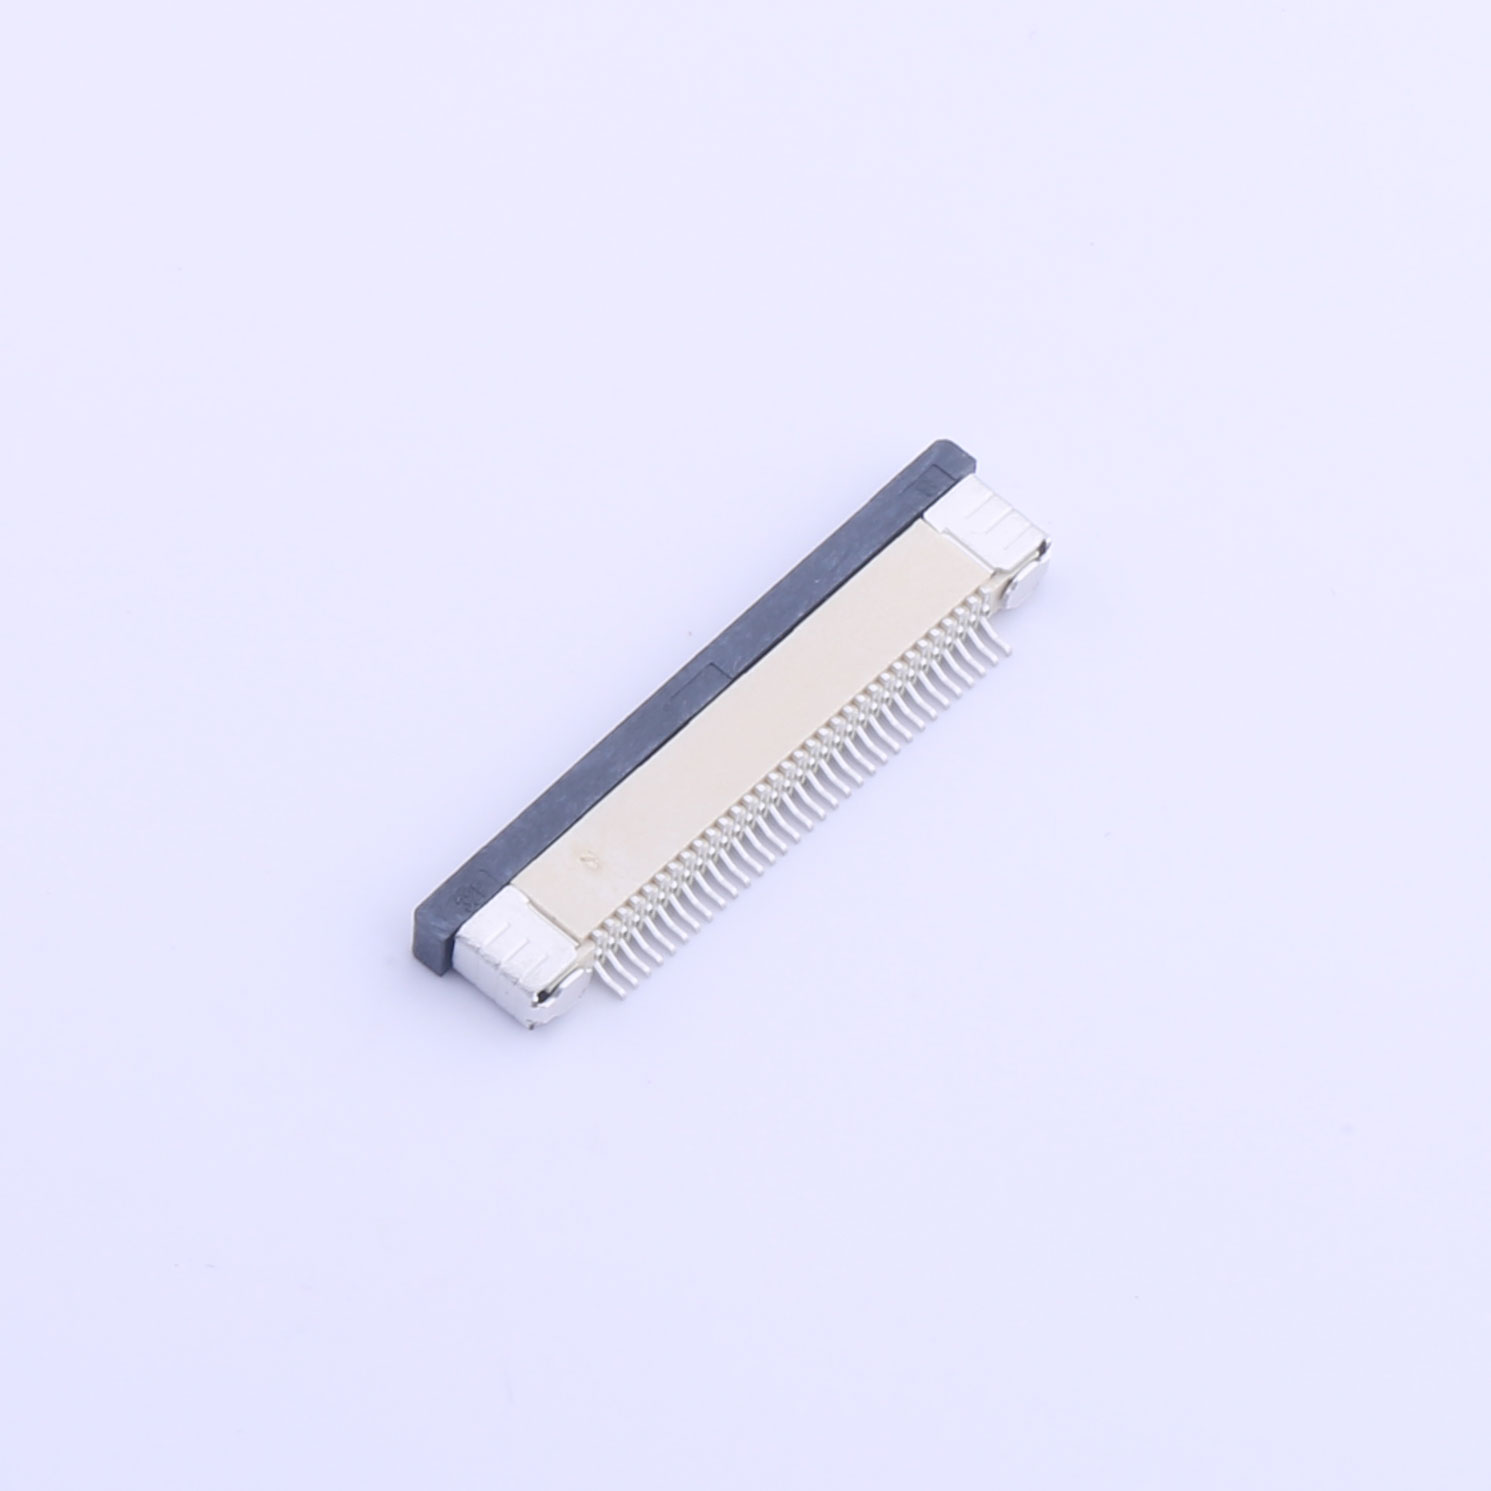 Kinghelm 0.5mm Pitch FPC FFC Connector 32P Height 2mm FFC Drawer type lower connection Contact SMT FPC Connector